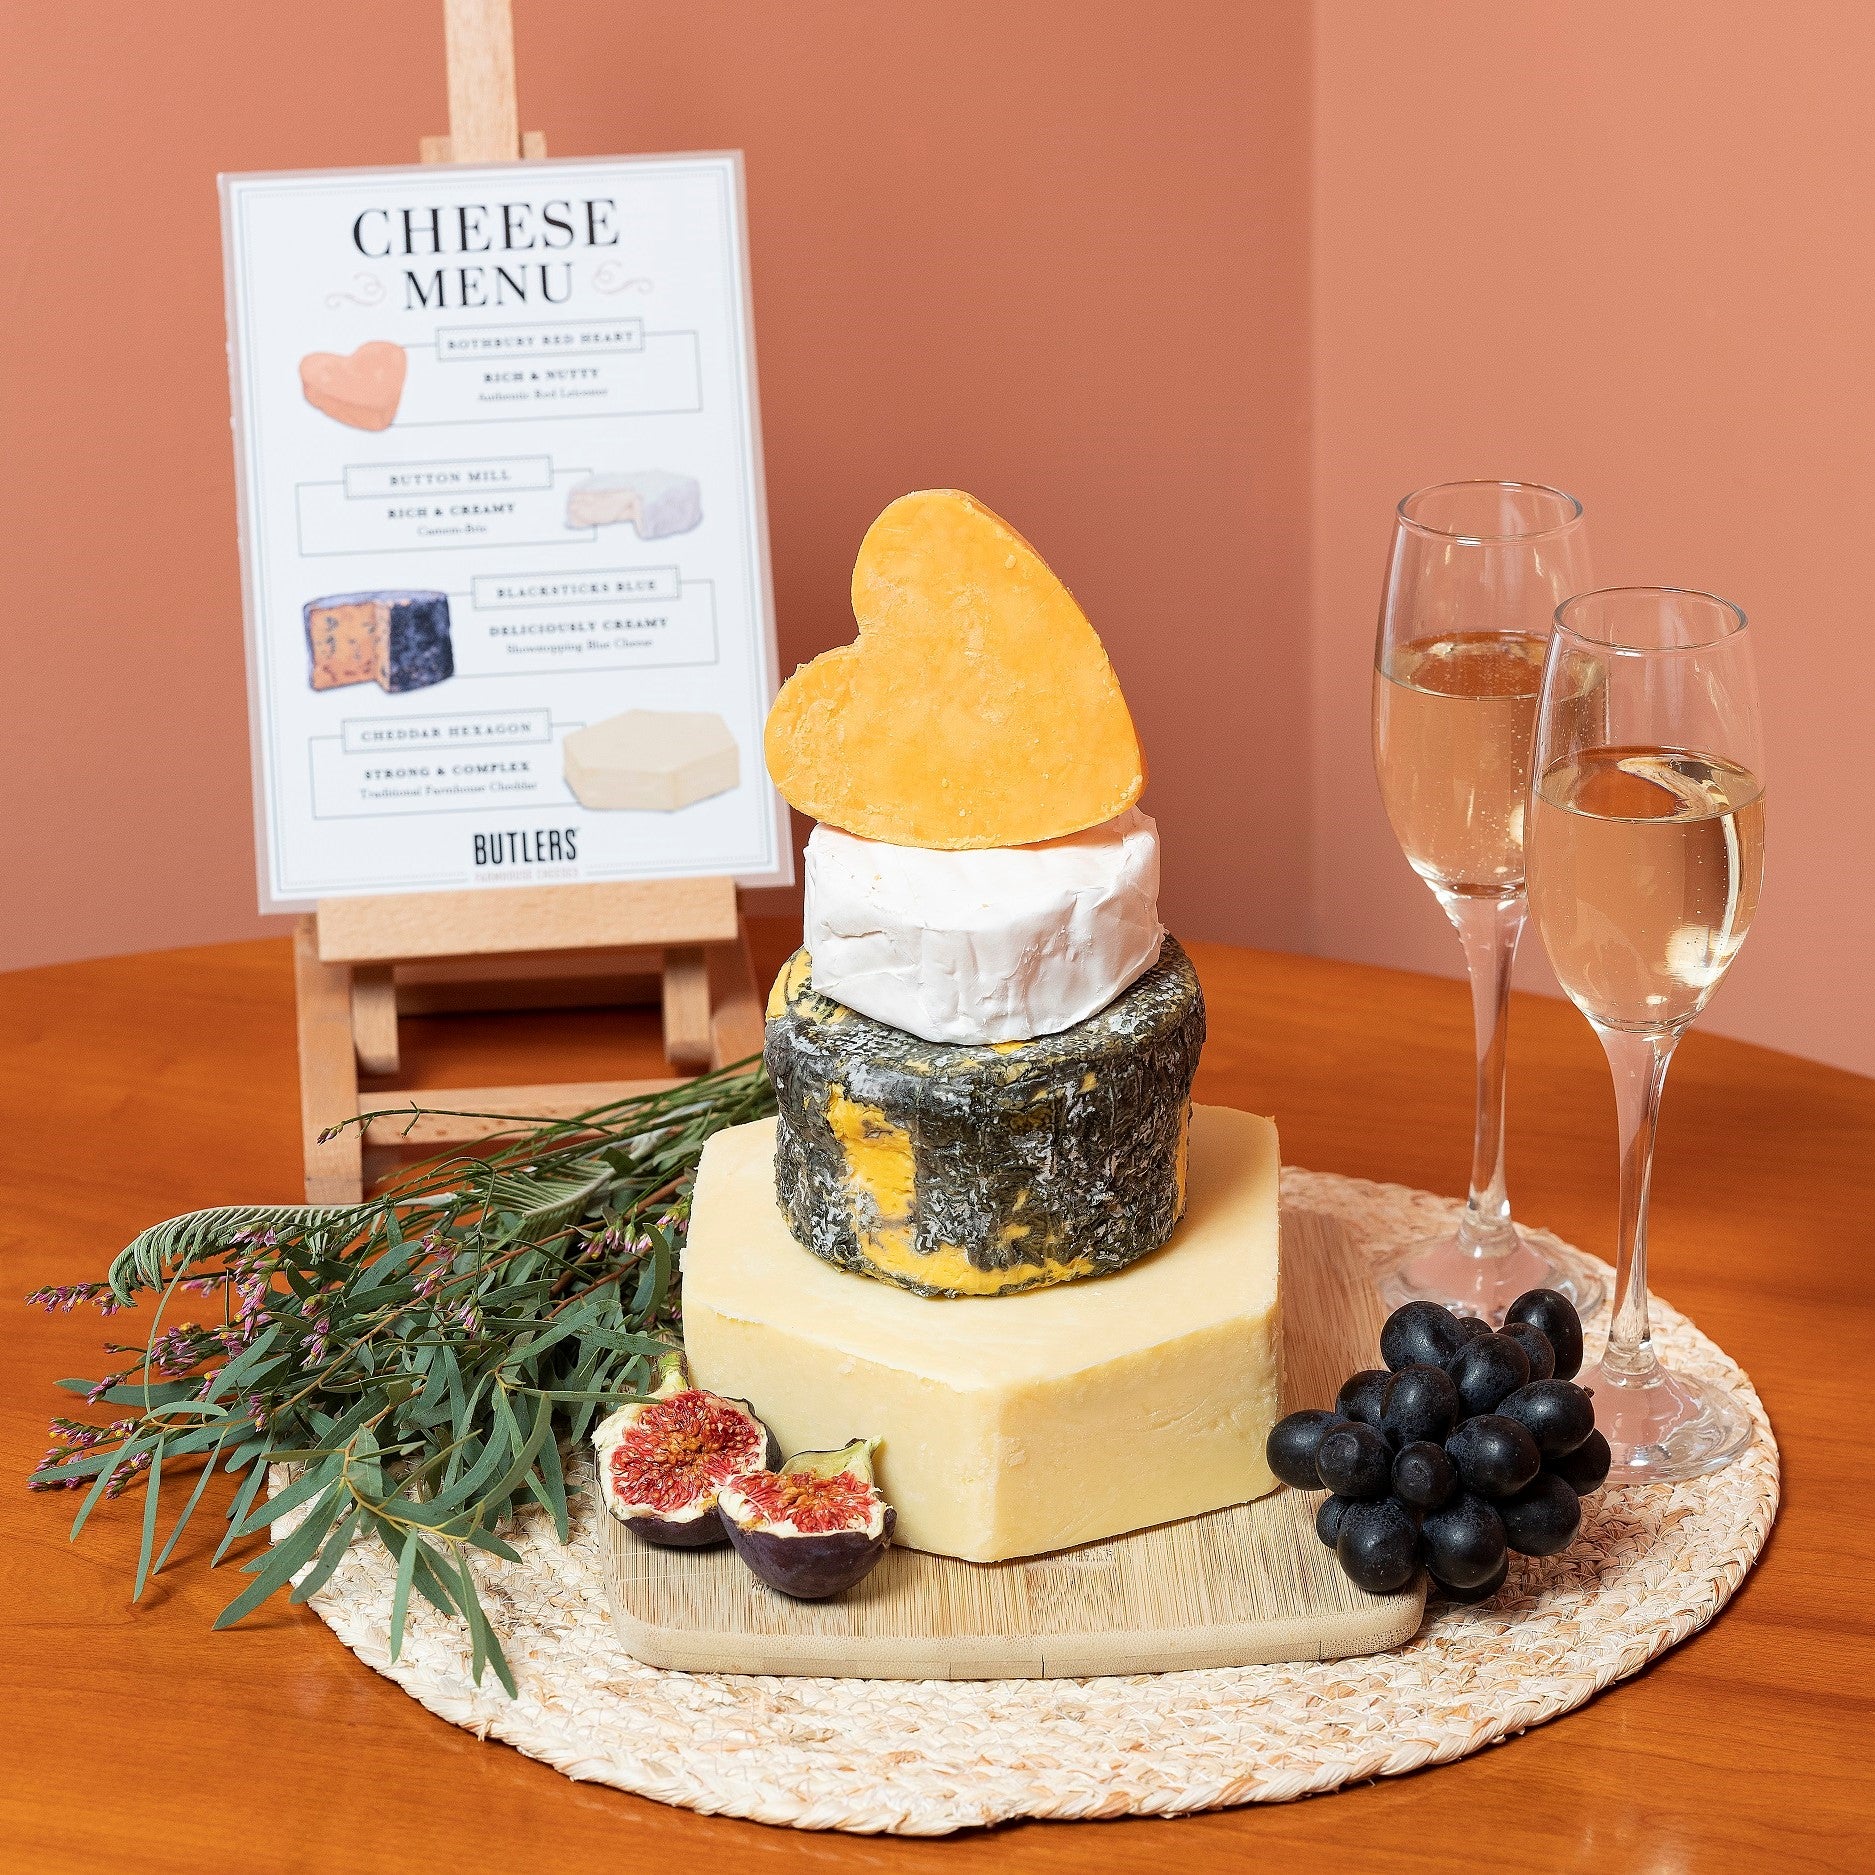 Small cheese wedding cake. Artisan cheese tower of hard, blue and soft cheese, topped with a red Lecister heart shaped cheese. Complete with our illustrated cheese menu and easel